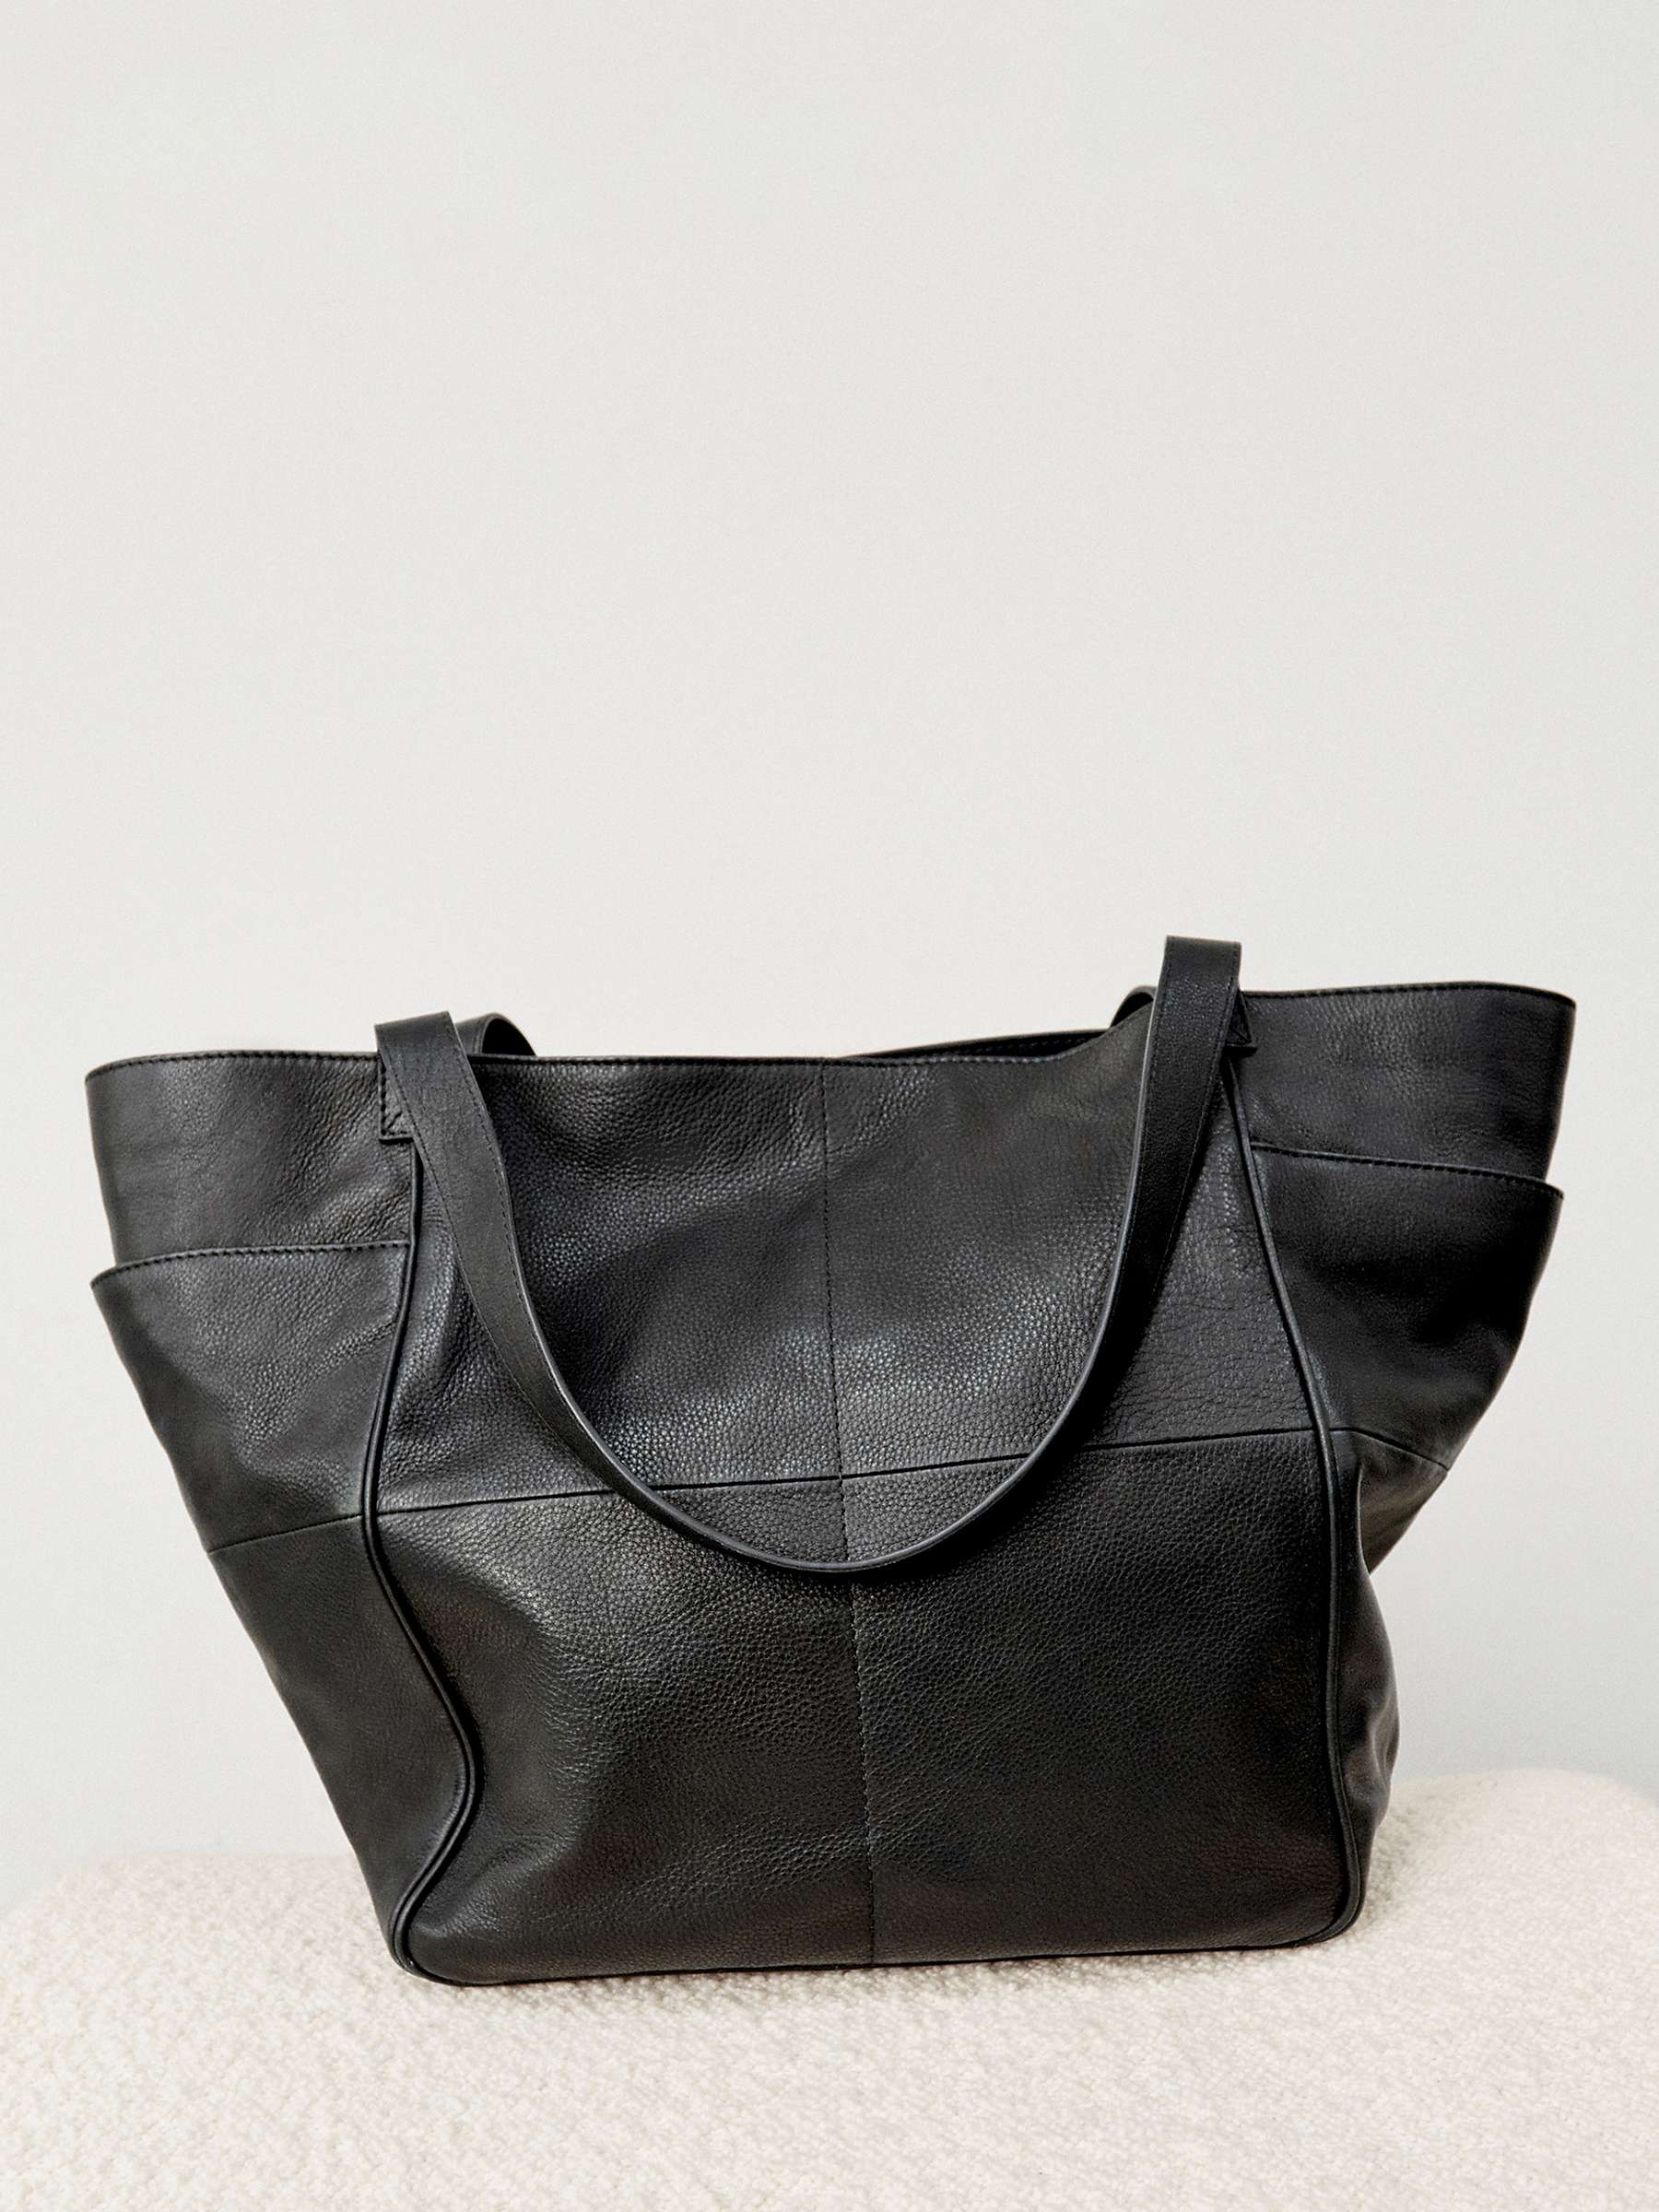 Buy HUSH Mariana Leather Tote Bag Online at johnlewis.com